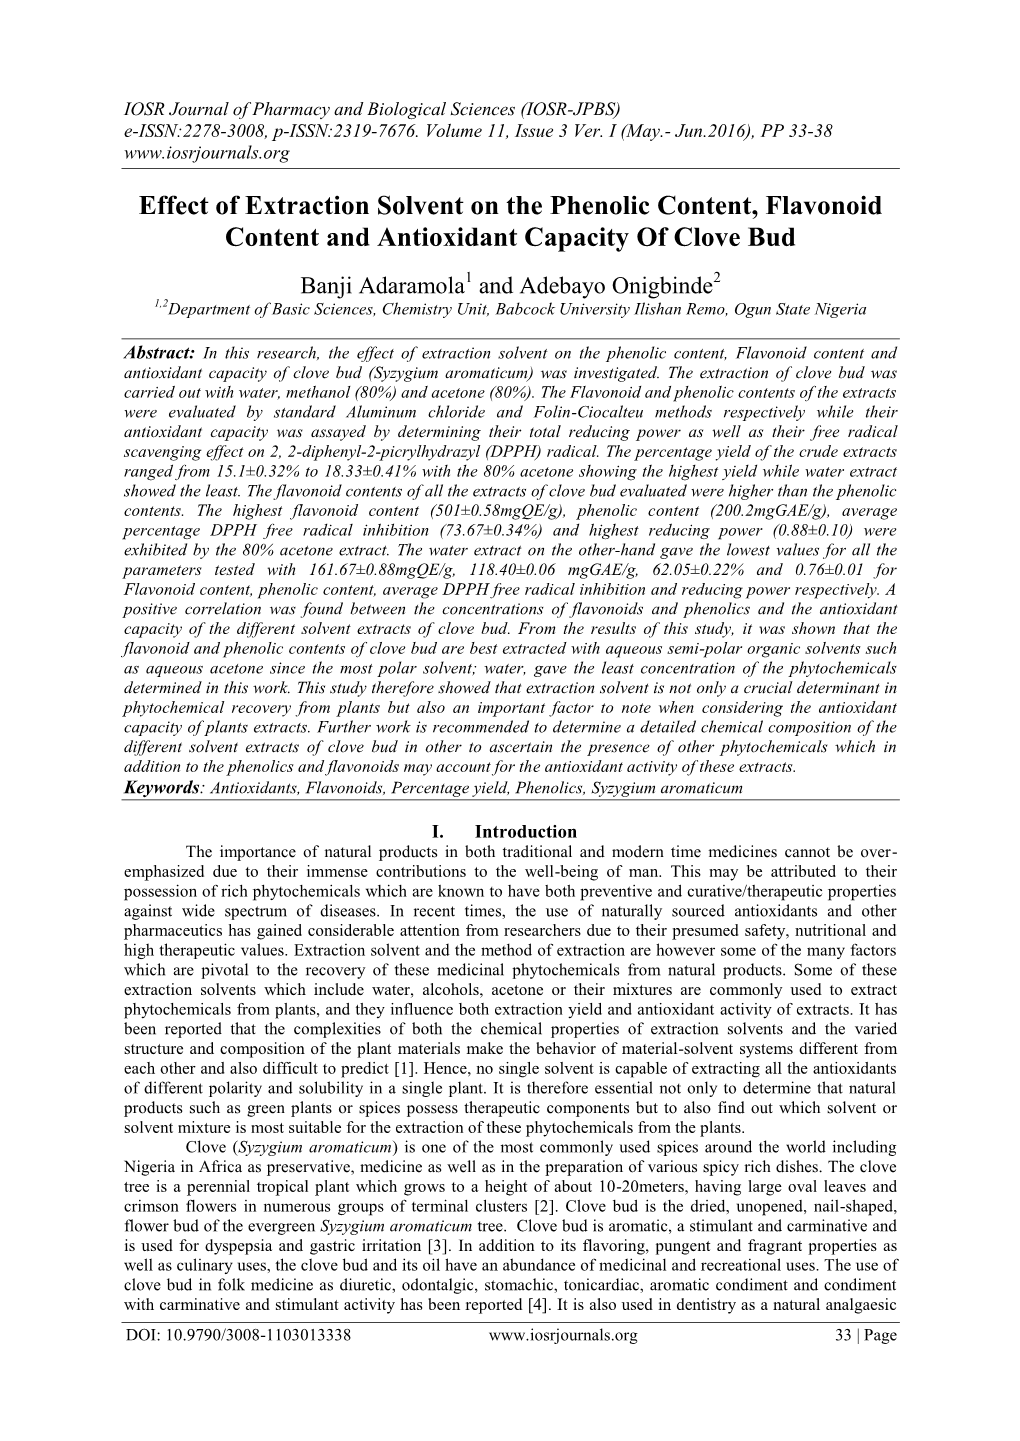 Effect of Extraction Solvent on the Phenolic Content, Flavonoid Content and Antioxidant Capacity of Clove Bud